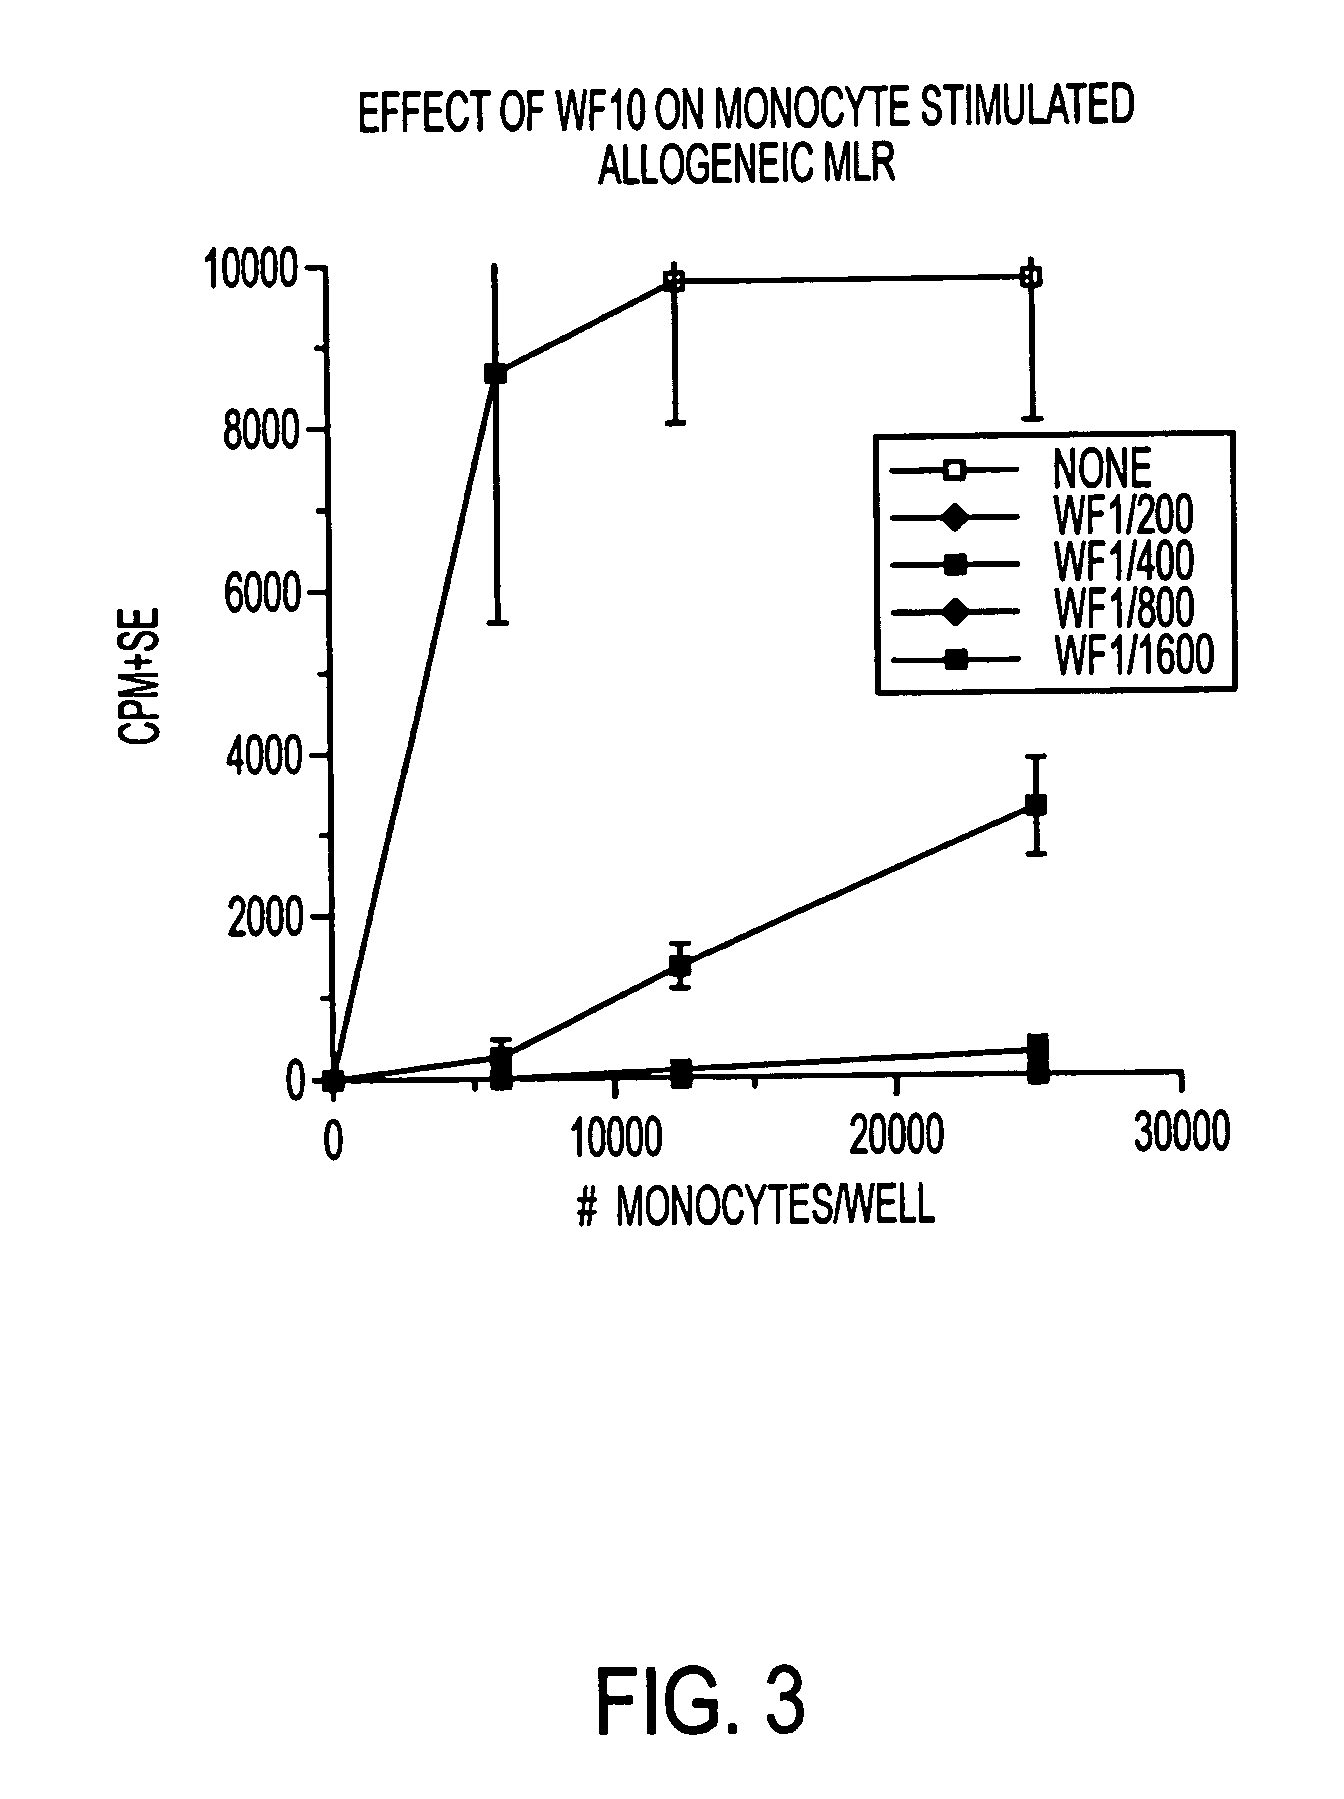 Use of a chemically stabilized chlorite solution for inhibiting an antigen-specific immune response